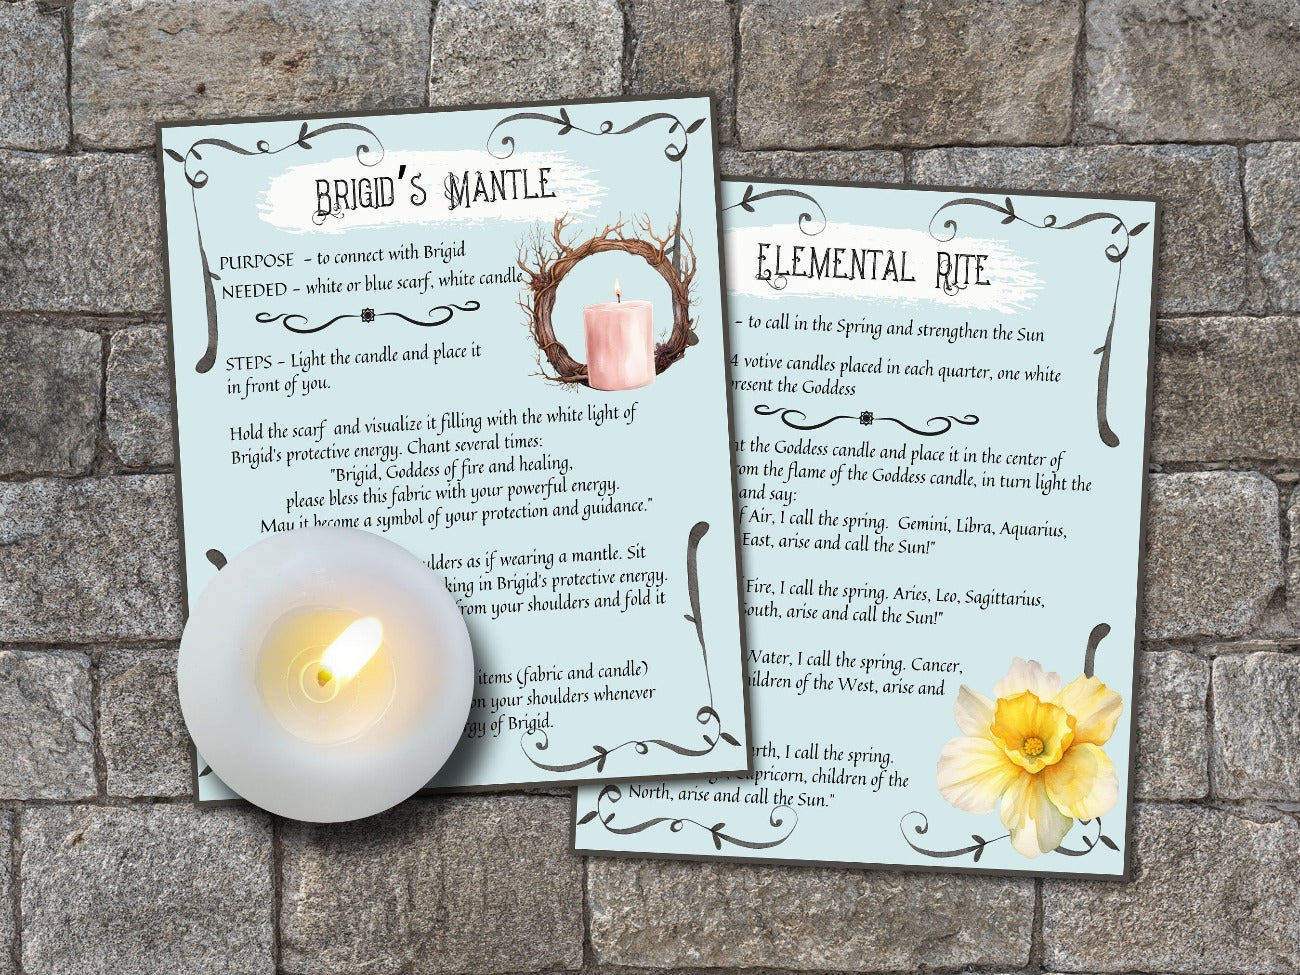 IMBOLC SPELL CARDS, Brigids Mantle and Elemental Rite Cards - Morgana Magick Spell